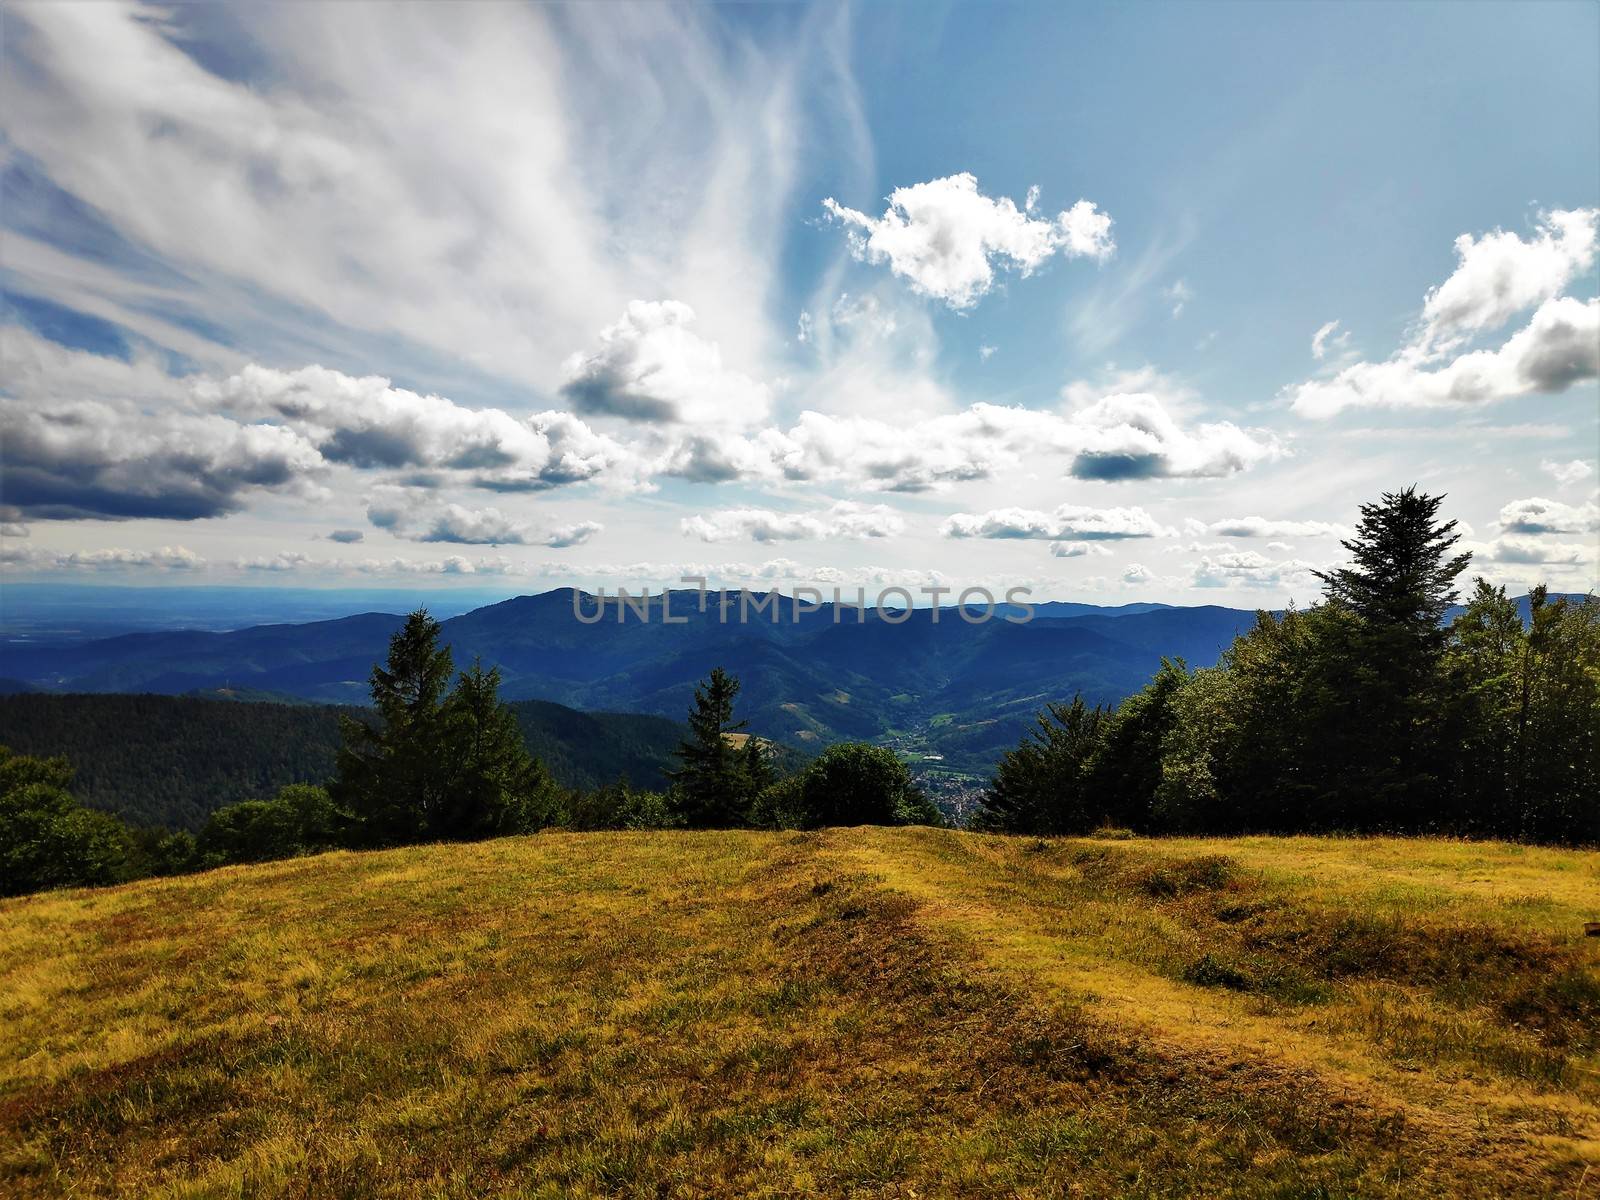 Outlook from the Trehkopf view point over the hills of the Vosges region by pisces2386